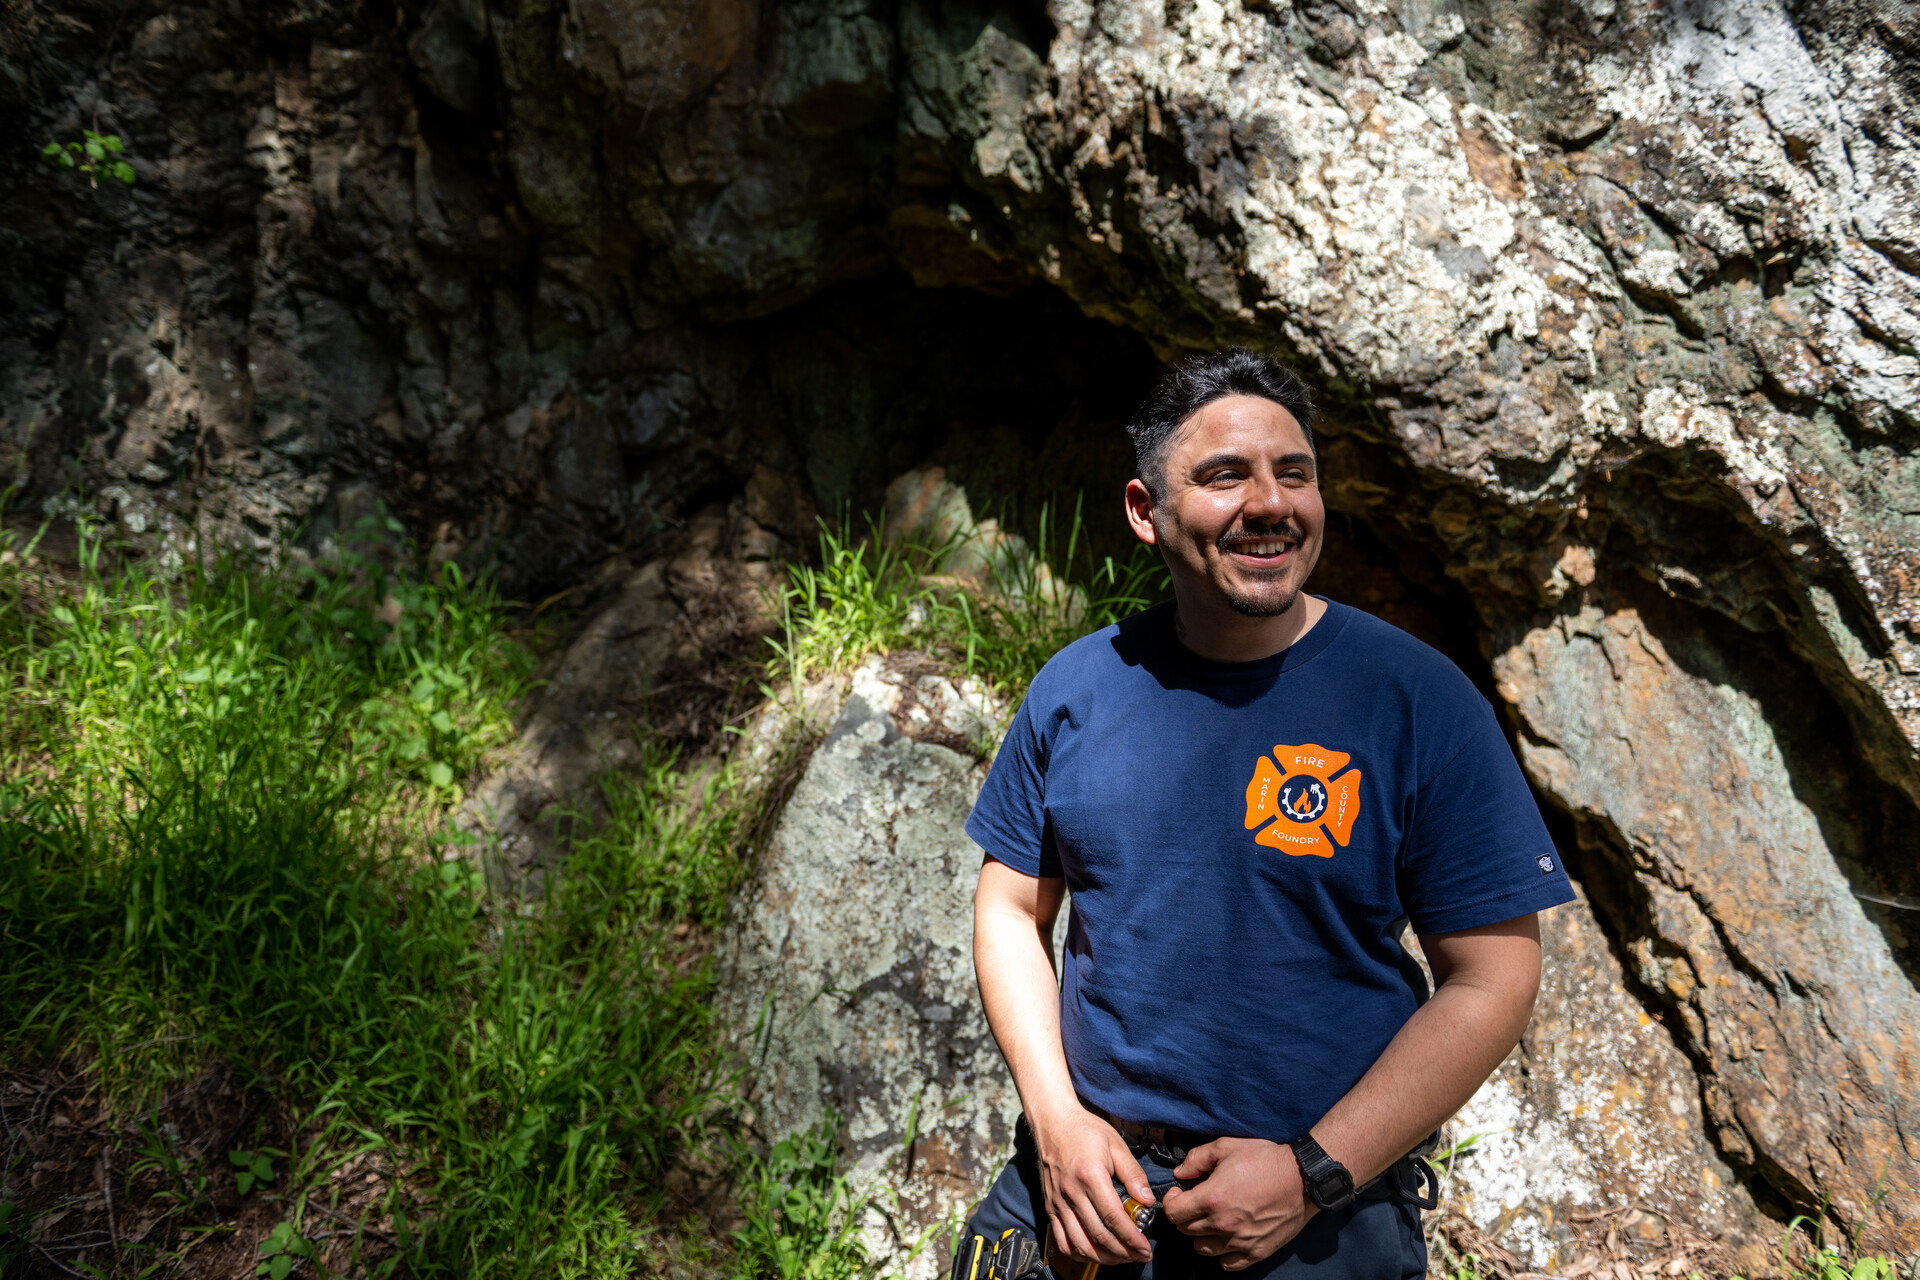 A Latino man with a blue tshirt with a FIRE Foundry logo smiles as he looks away from the camera.